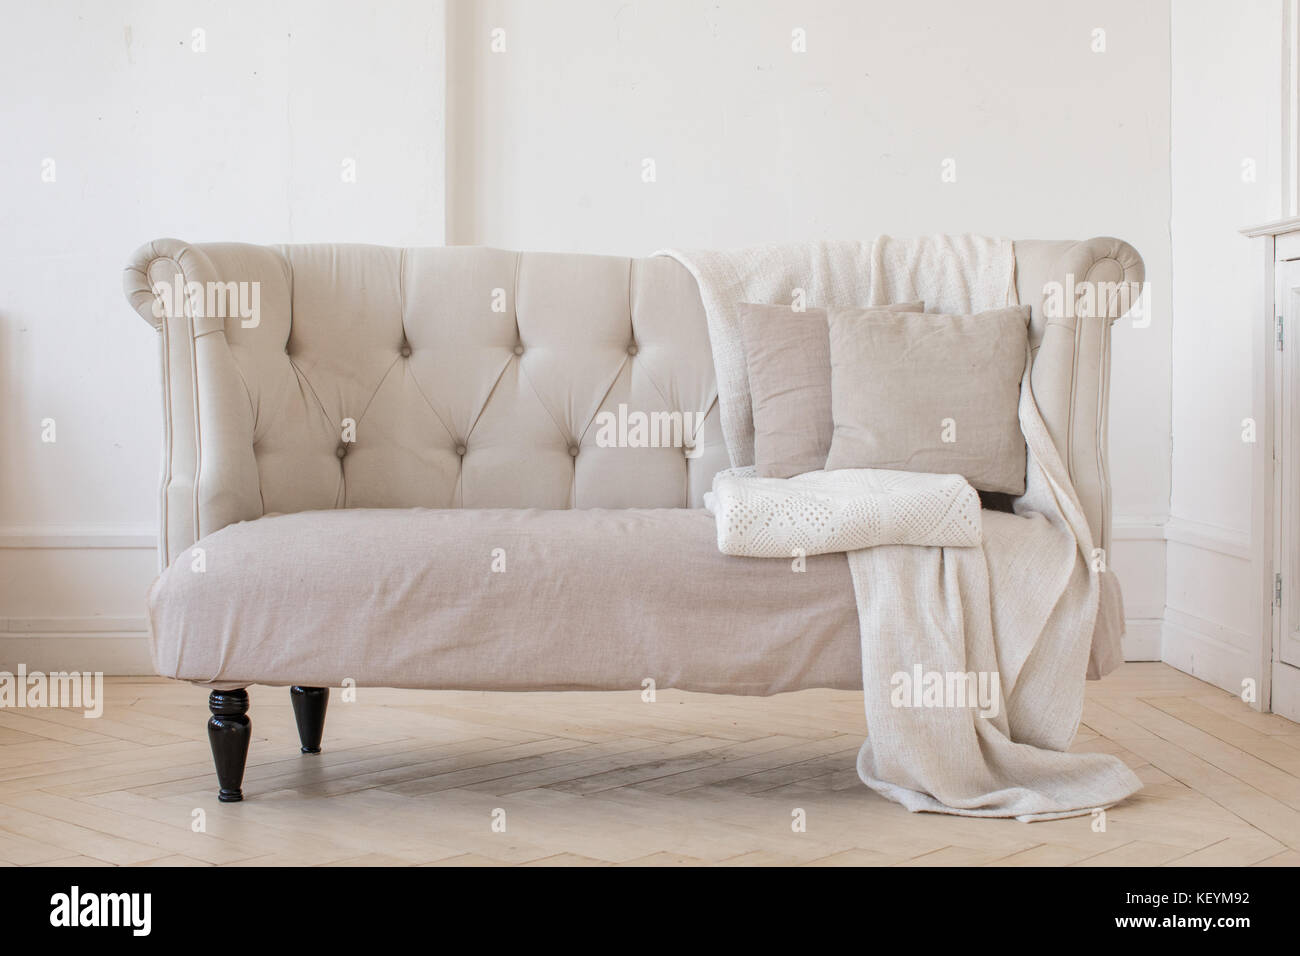 Small sofa in room on a white background Stock Photo